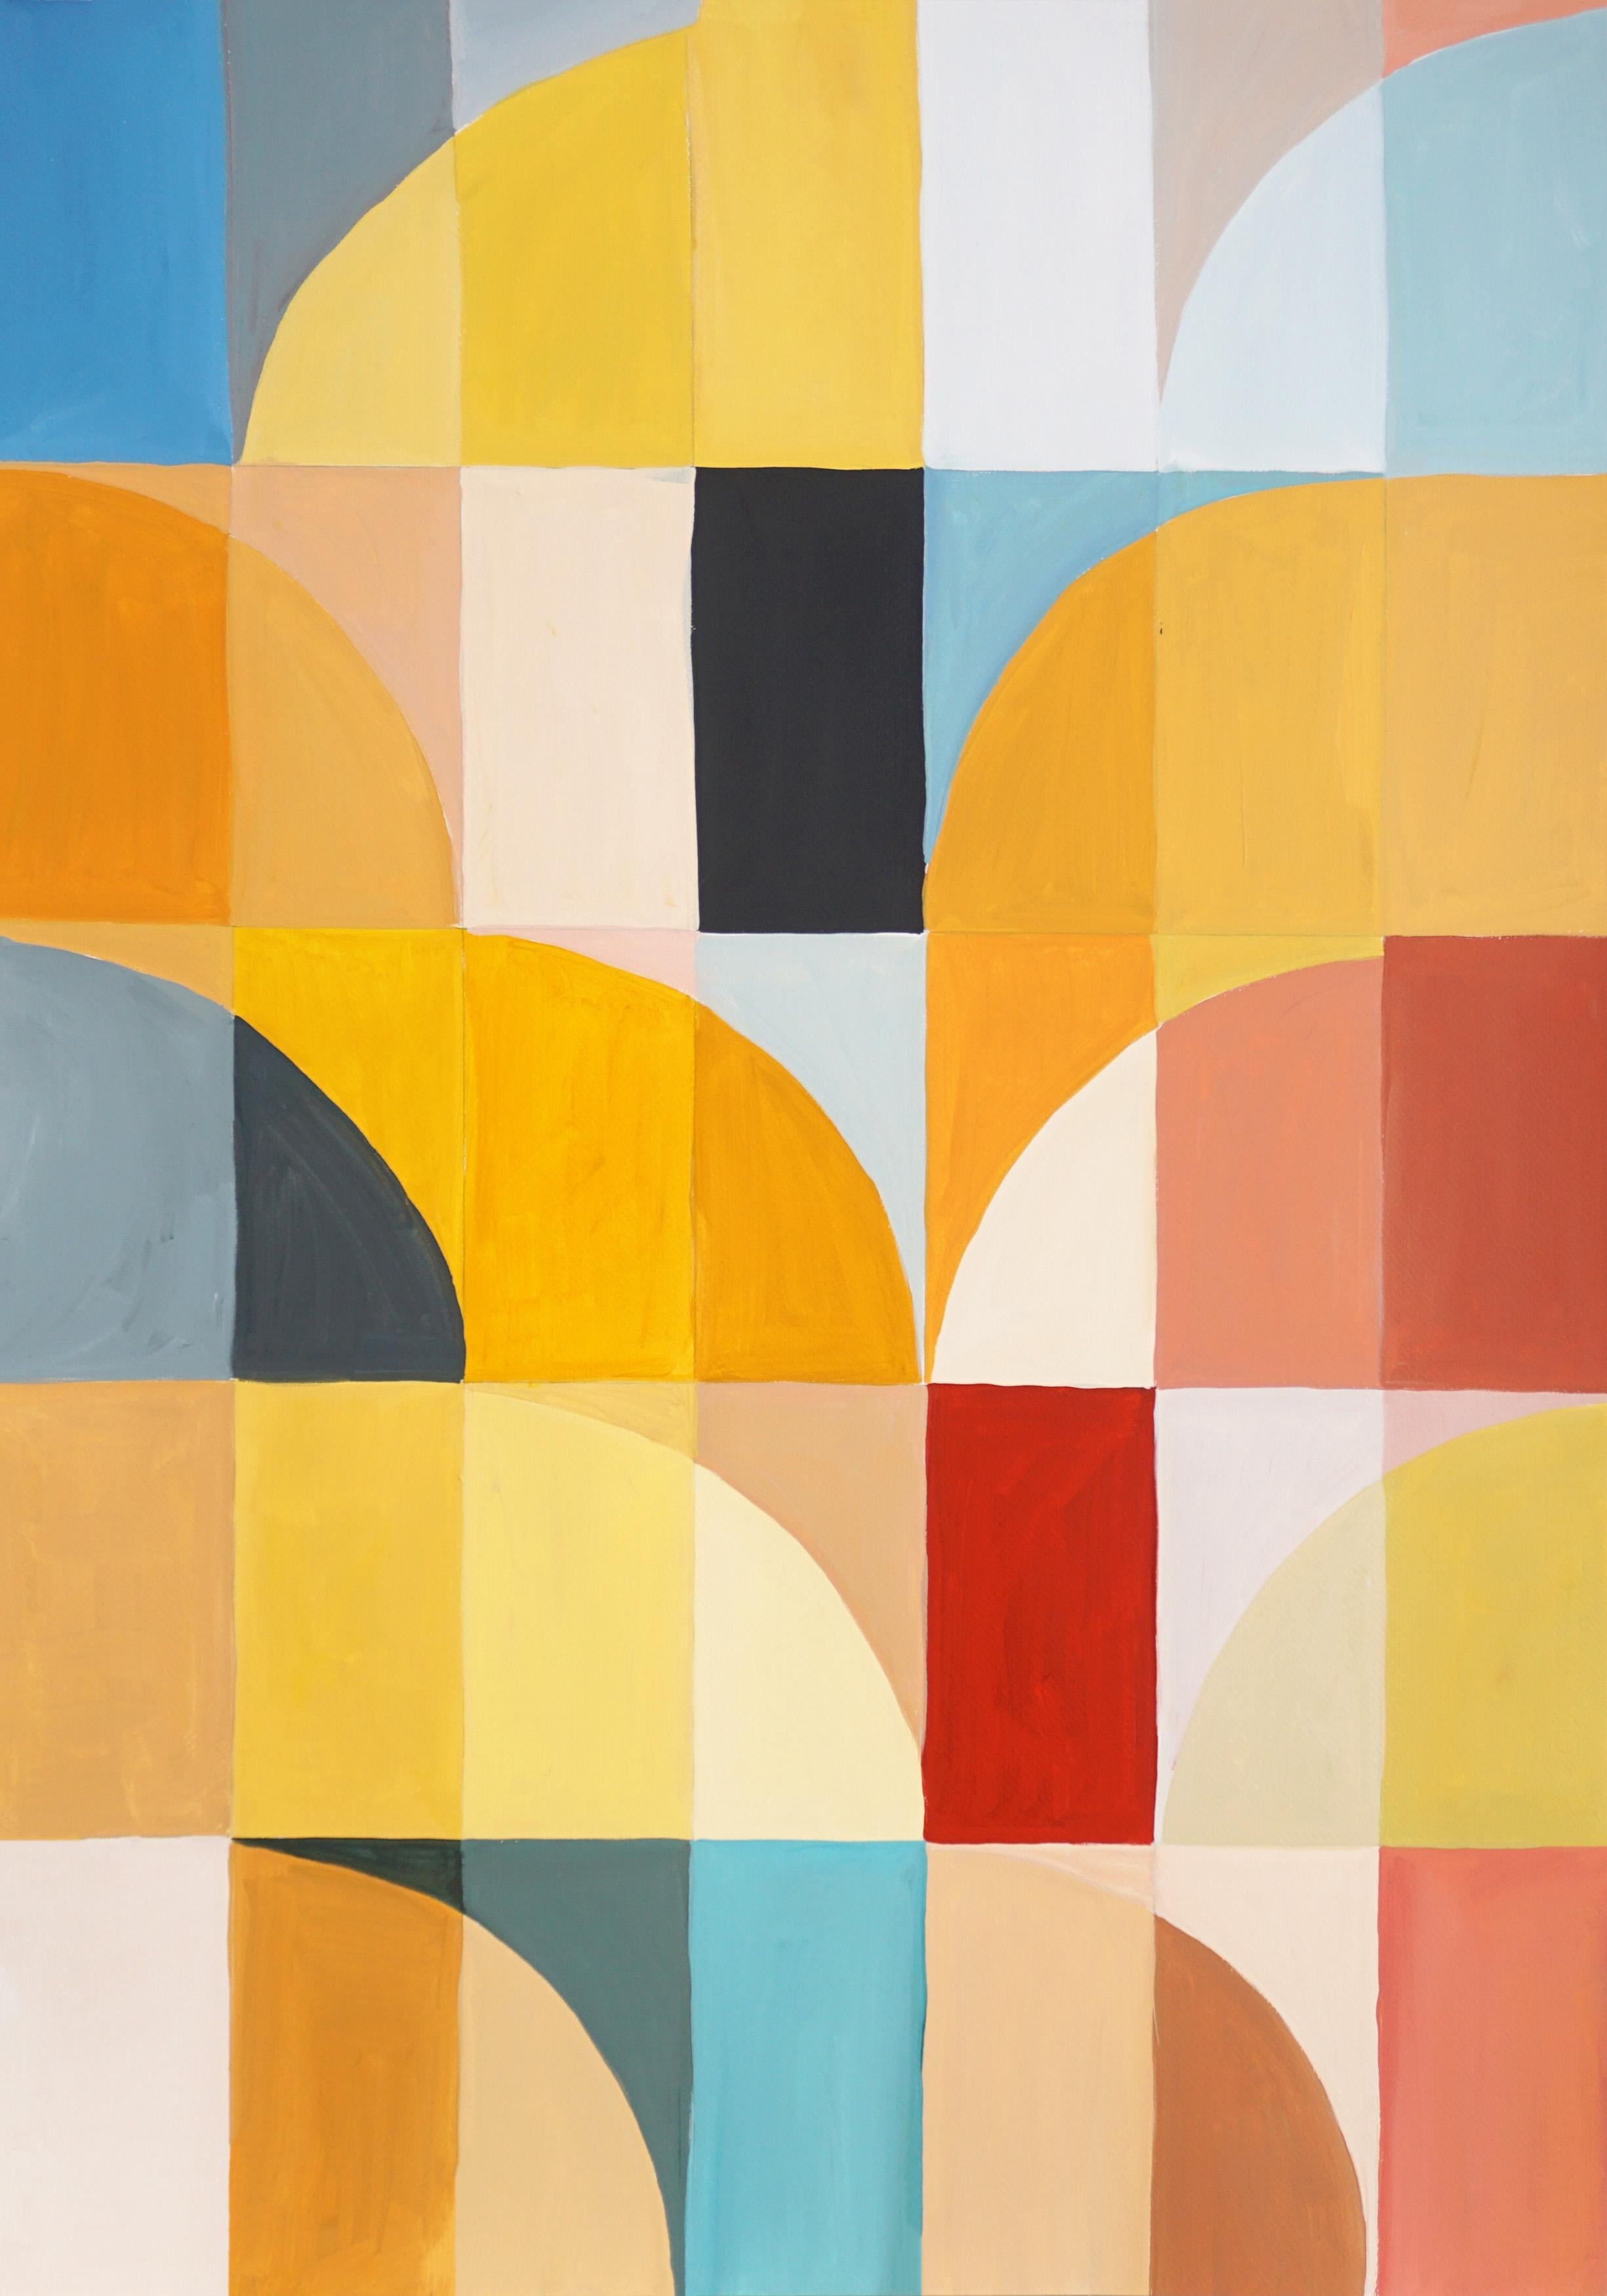 Primary Tones Arcs & Curves, Yellow, Blue and Red Bauhaus Grid, Large Triptych - Abstract Geometric Painting by Natalia Roman